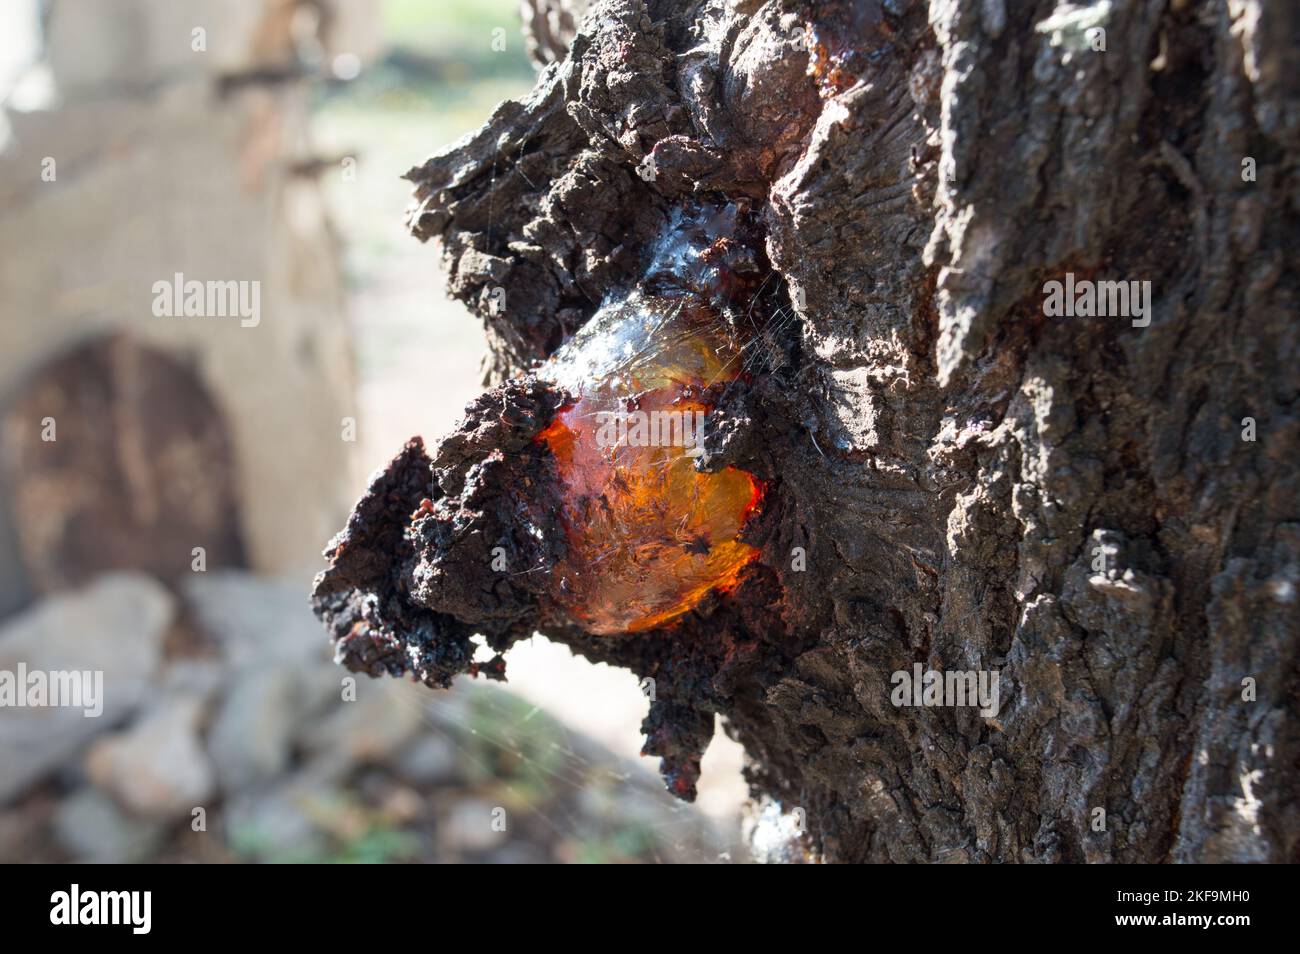 Resin on the almond tree bark, natural gum, used as adhesive Stock Photo